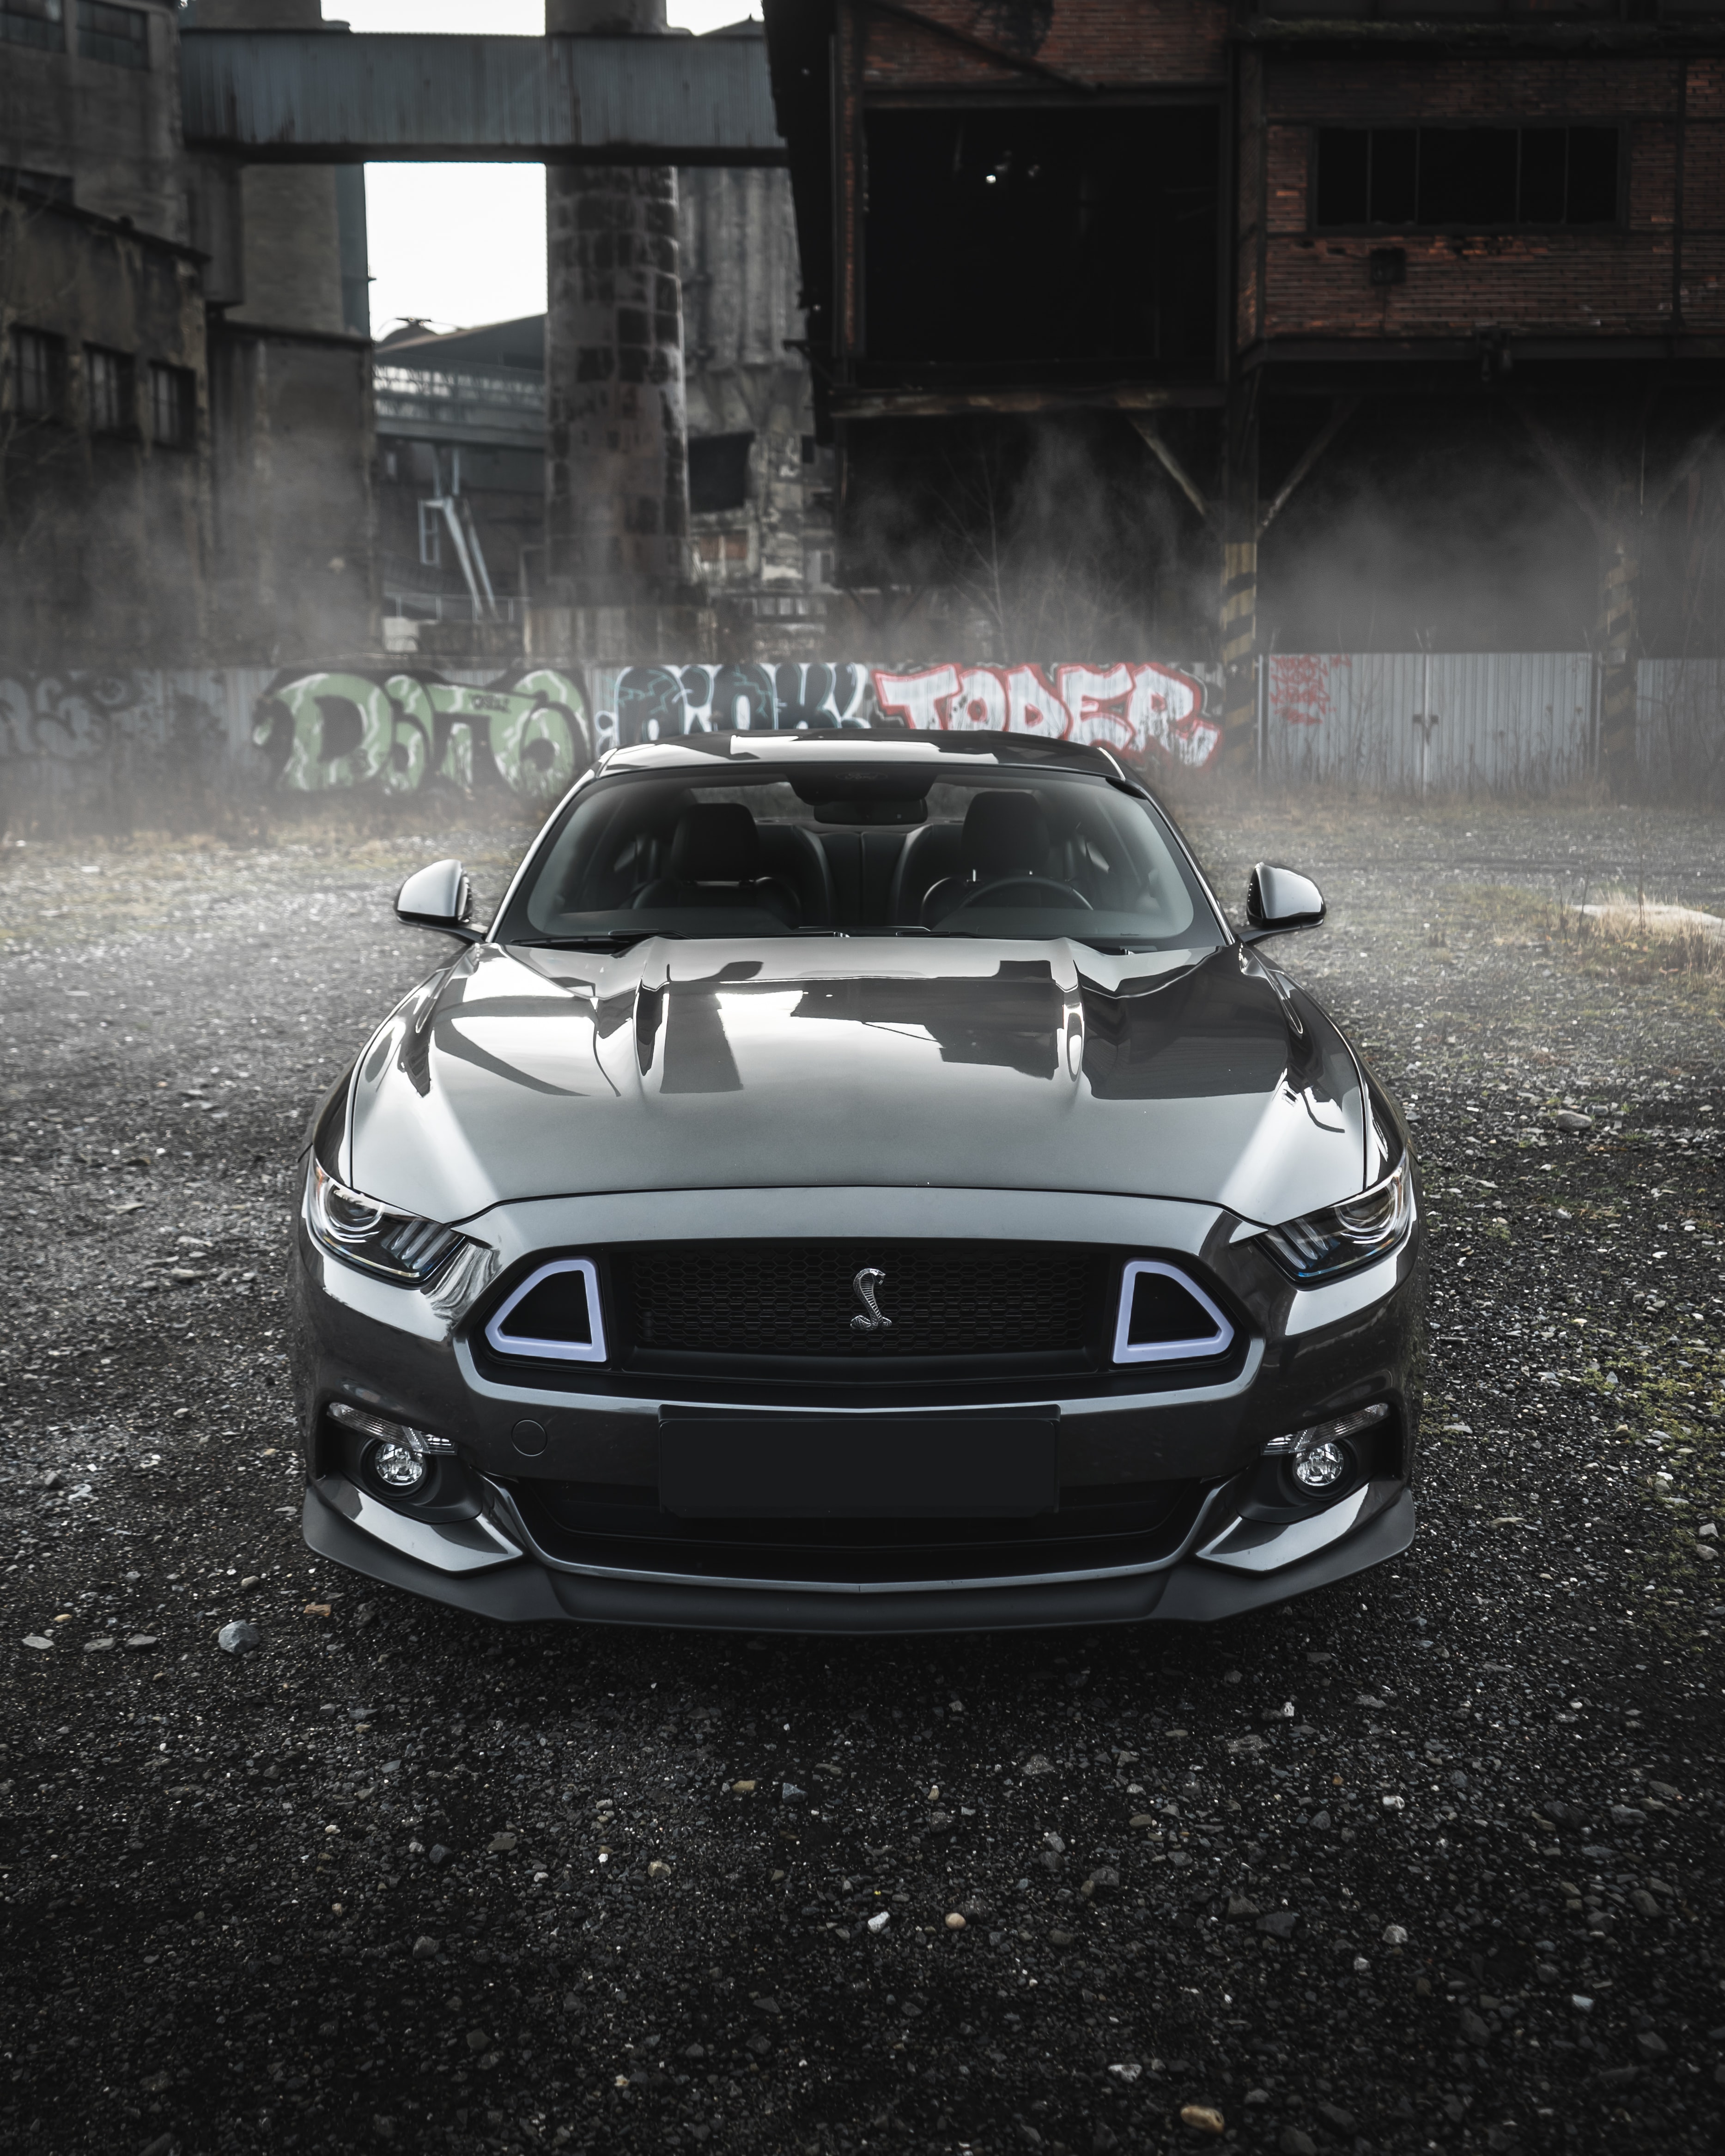 117922 Screensavers and Wallpapers Shelby for phone. Download cars, car, front view, grey, shelby, shelby mustang pictures for free